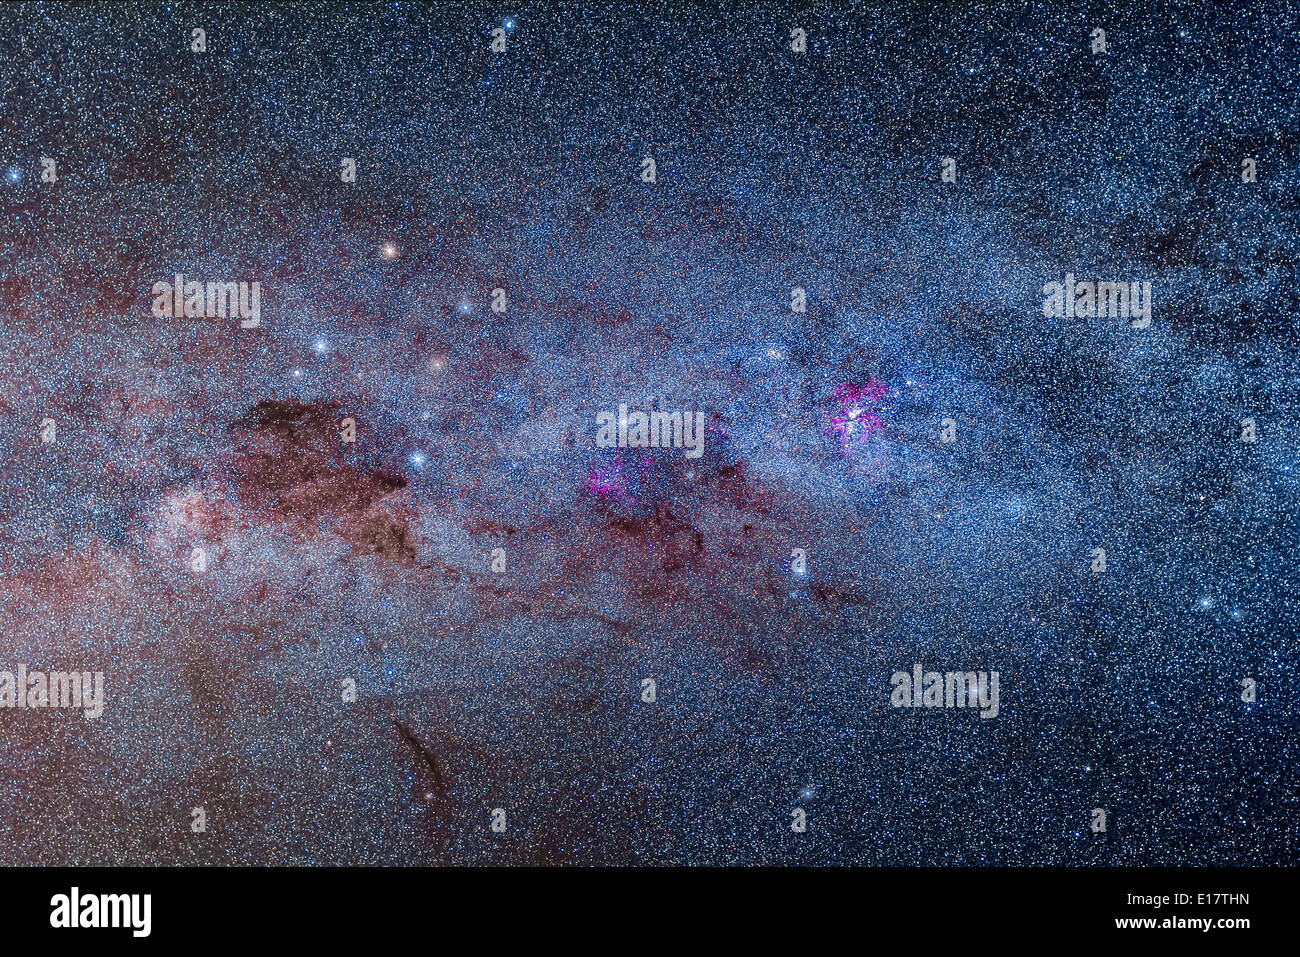 The Milky Way through Carina and Crux, with the Carina Nebula at right and the Southern Cross at left Stock Photo